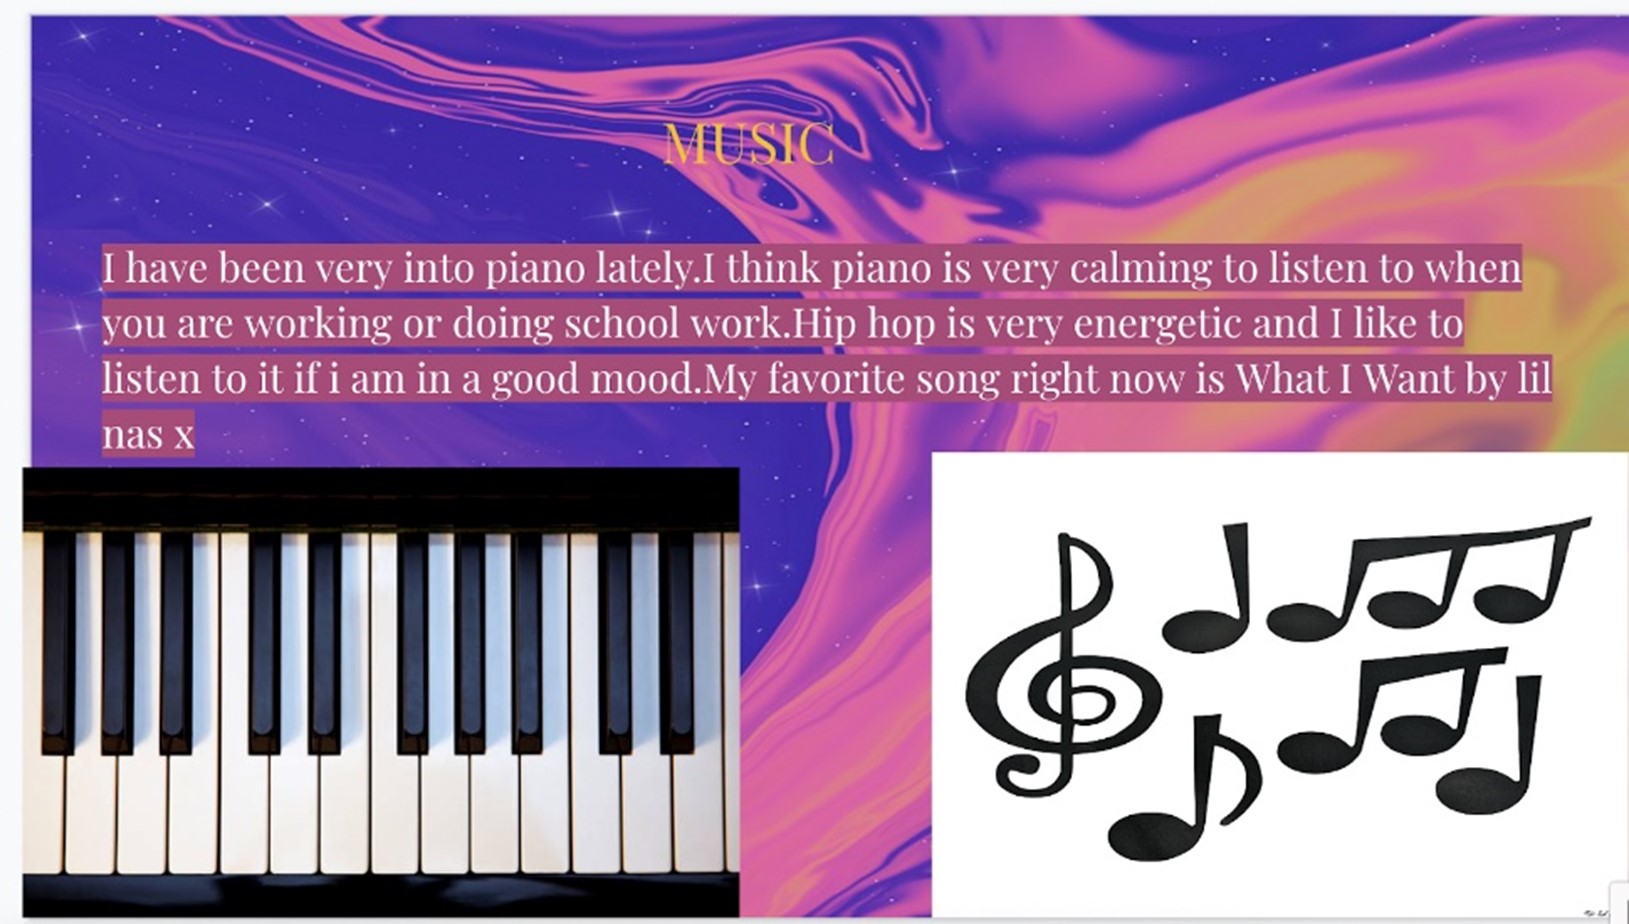 Screen shot of a slide from a music learning online platform. The slide includes pink and blue graphic design with a piano and music notes.